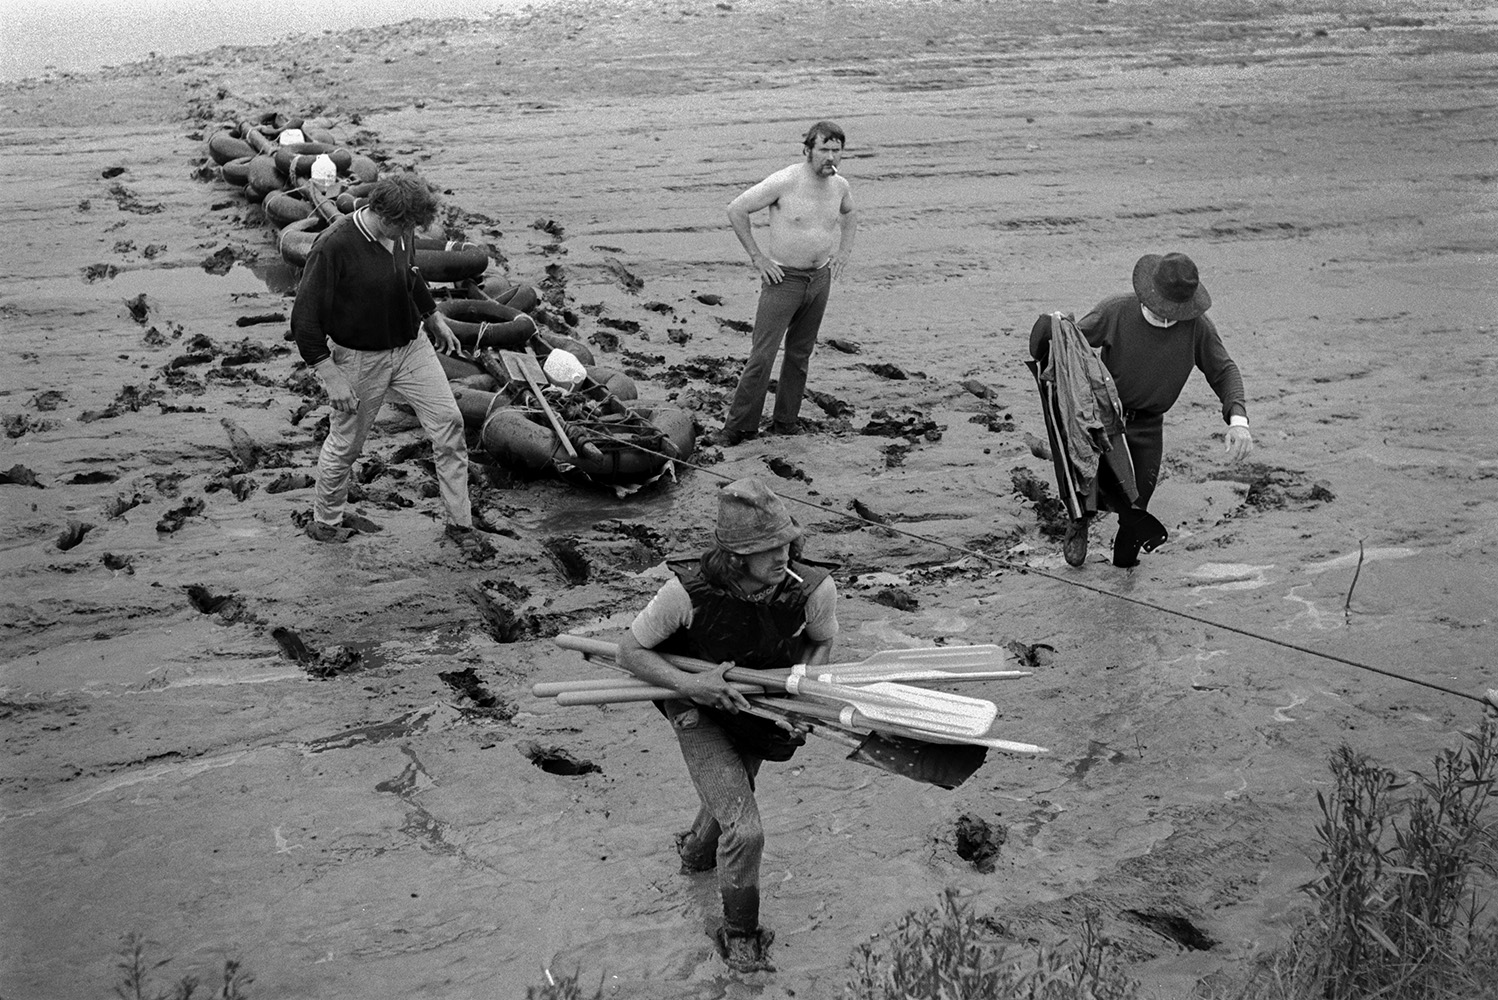 A homemade raft being dragged across mud flats after the Barnstaple Raft Race in Rock Park, Barnstaple. Four men who rowed the raft are walking through the mud alongside it. One of them is holding the oars.